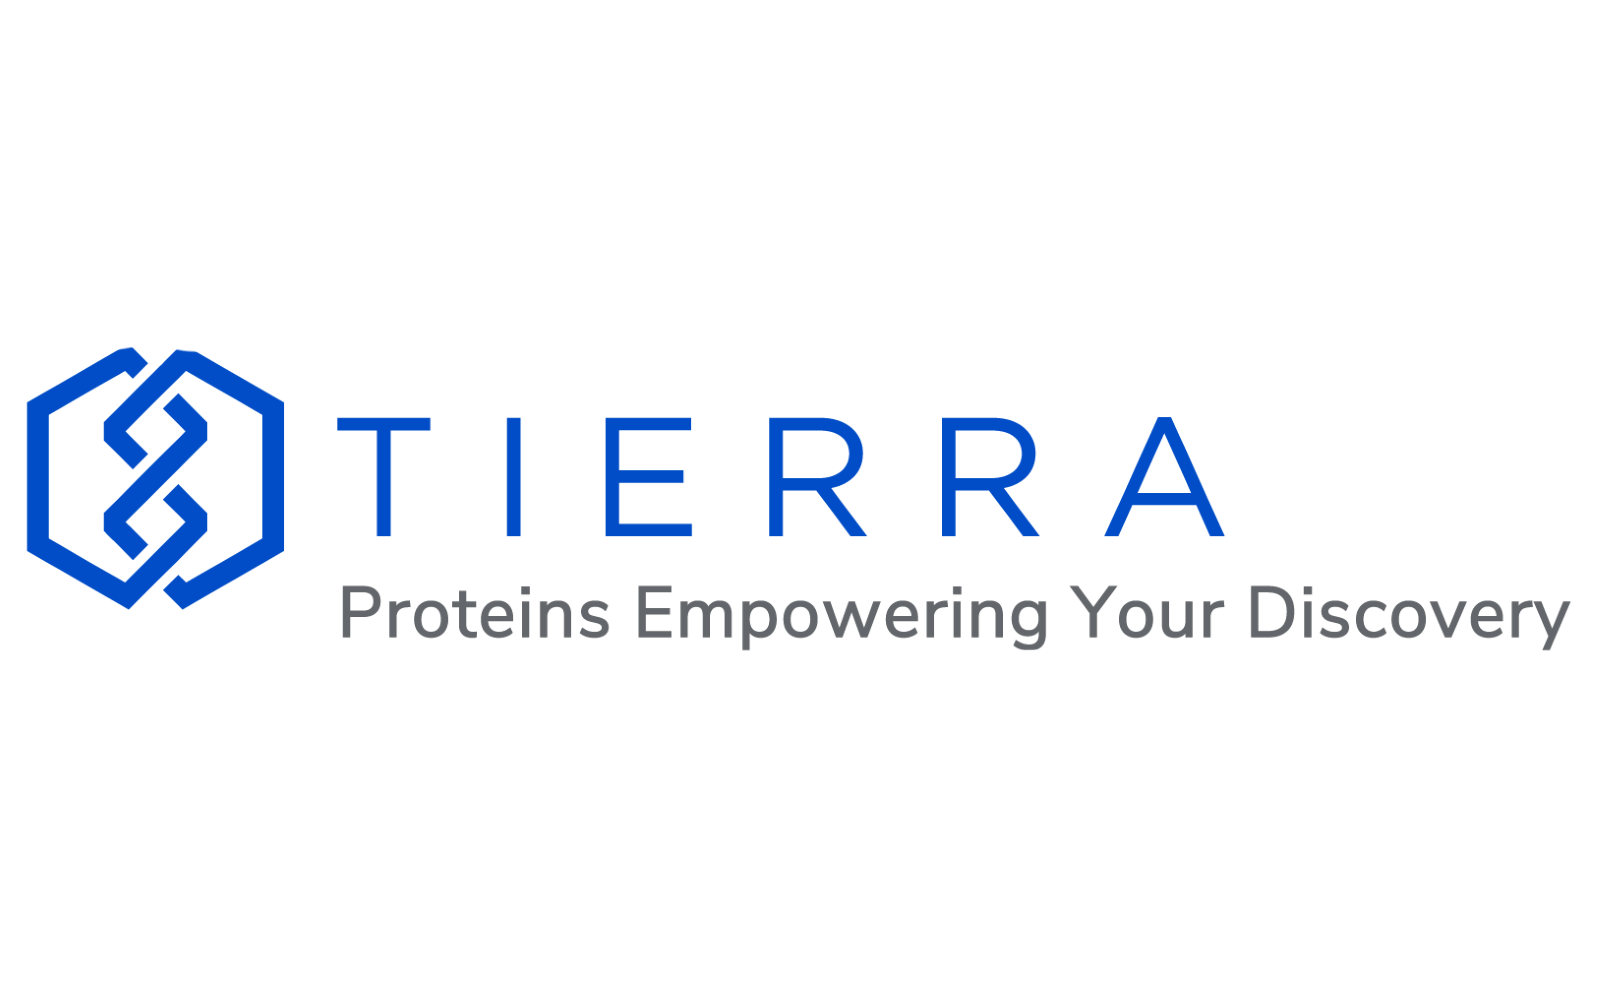 Tierra proteins empowering your discovery 